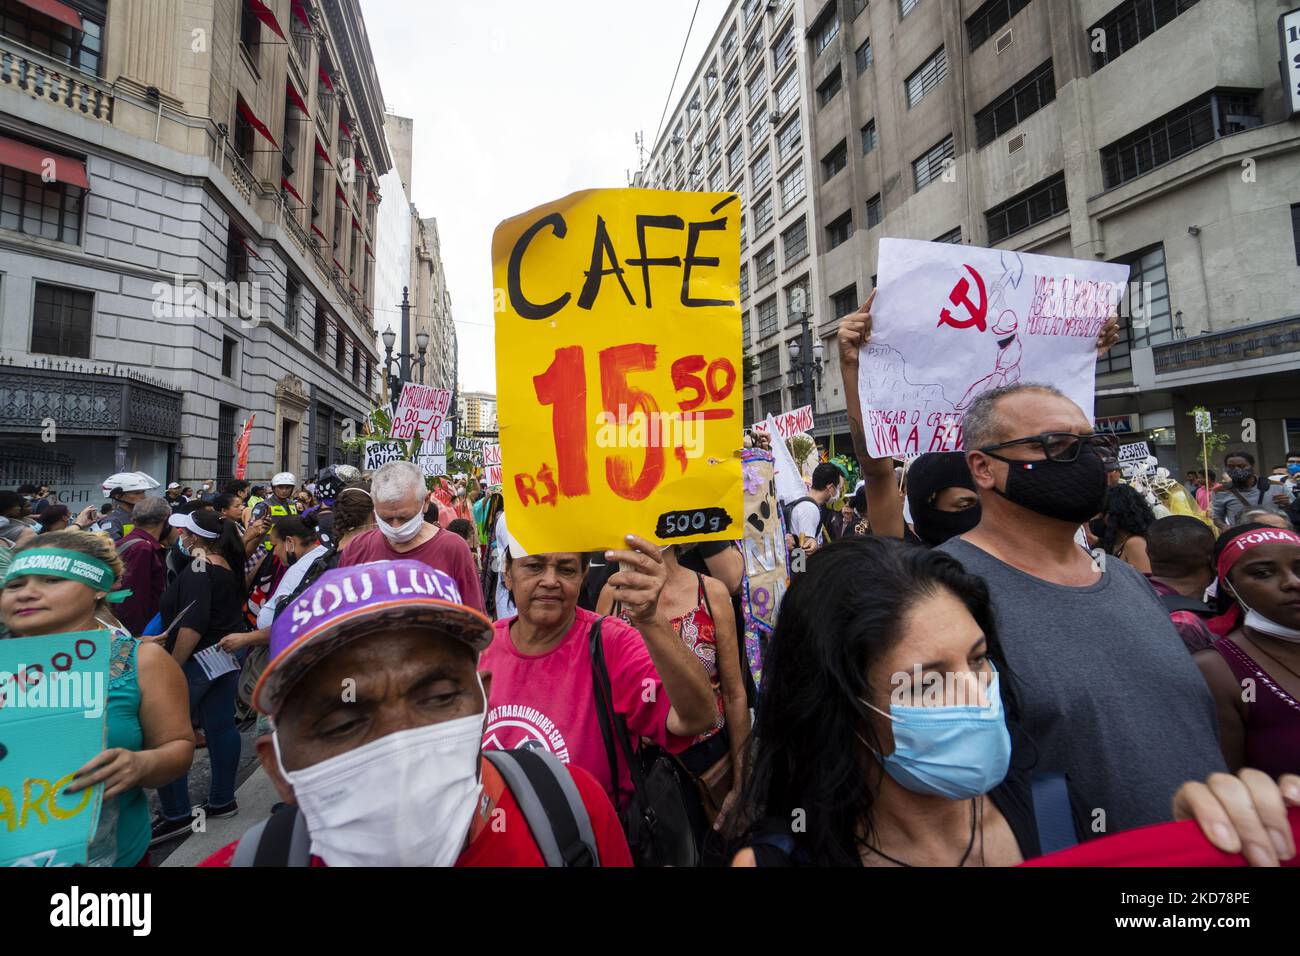 Members of opposition parties and social movements protest against Brazilian President Jair Bolsonaro's handling on unemployment and hike fuel prices, in downtown Sao Paulo, Brazil, on April 9, 2022. (Photo by Cris Faga/NurPhoto) Stock Photo